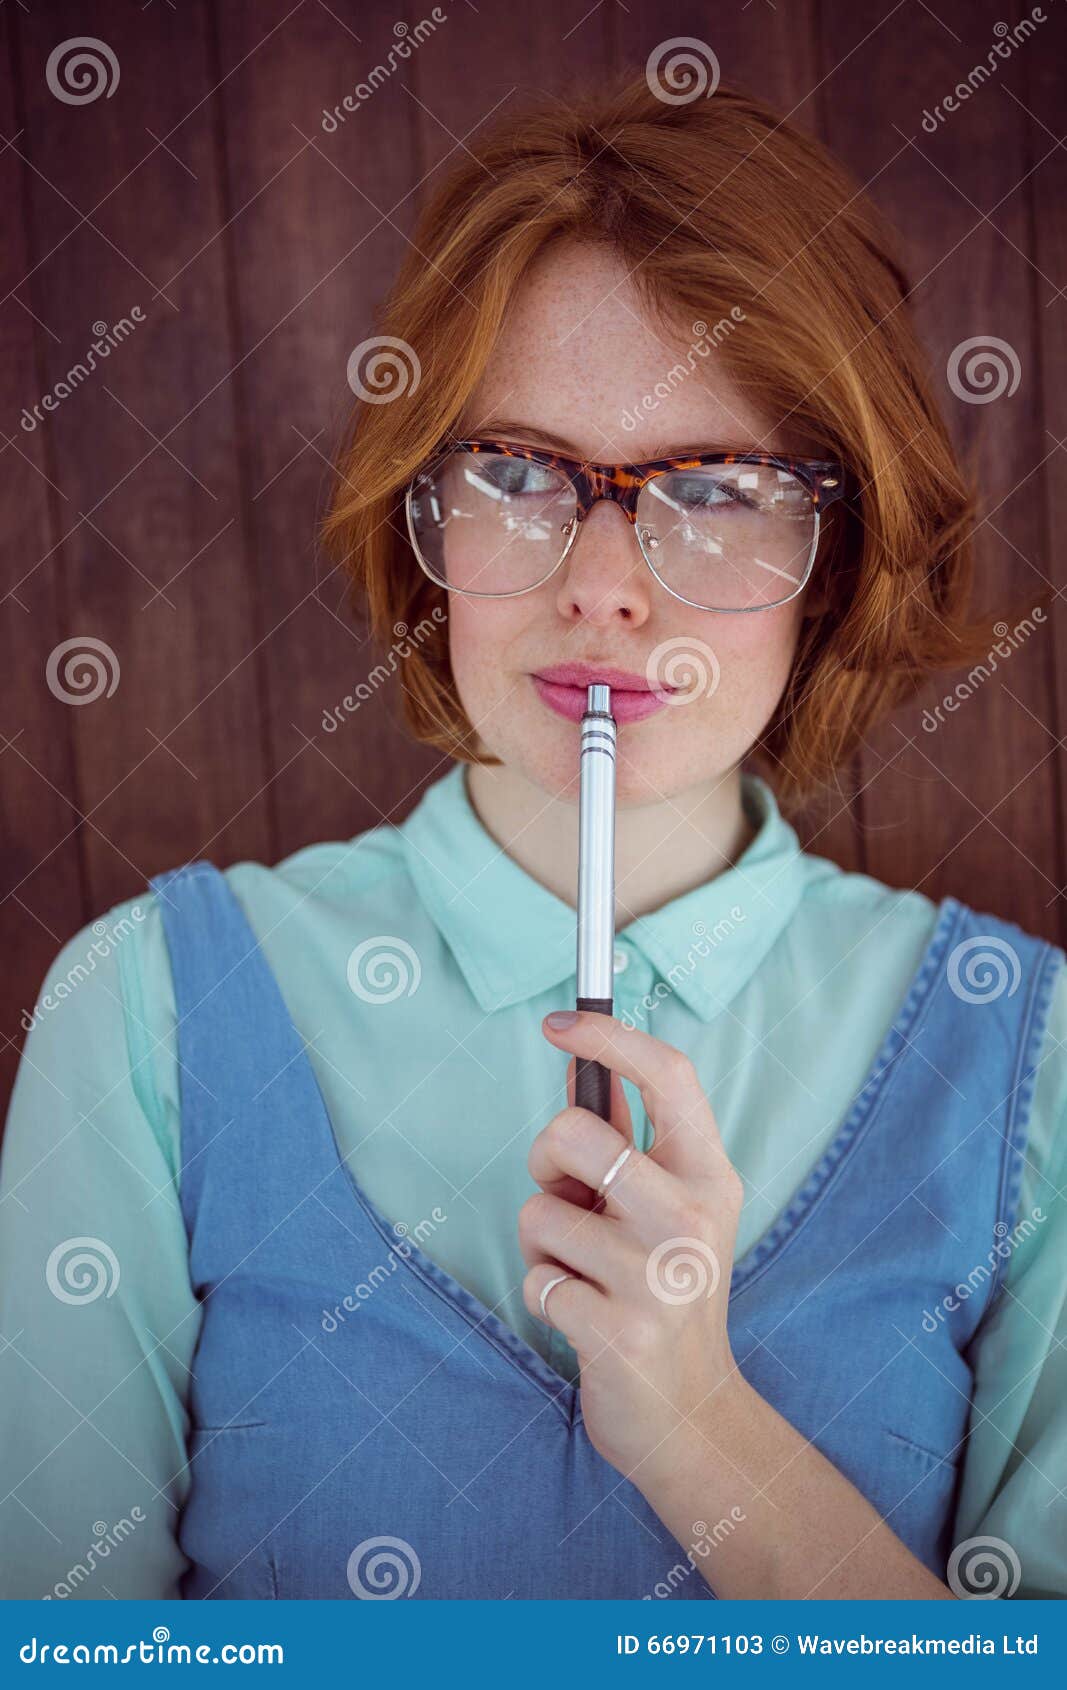 Cute Red Haired Hipster Chewing A Pen Stock Image - Image of beautiful ...